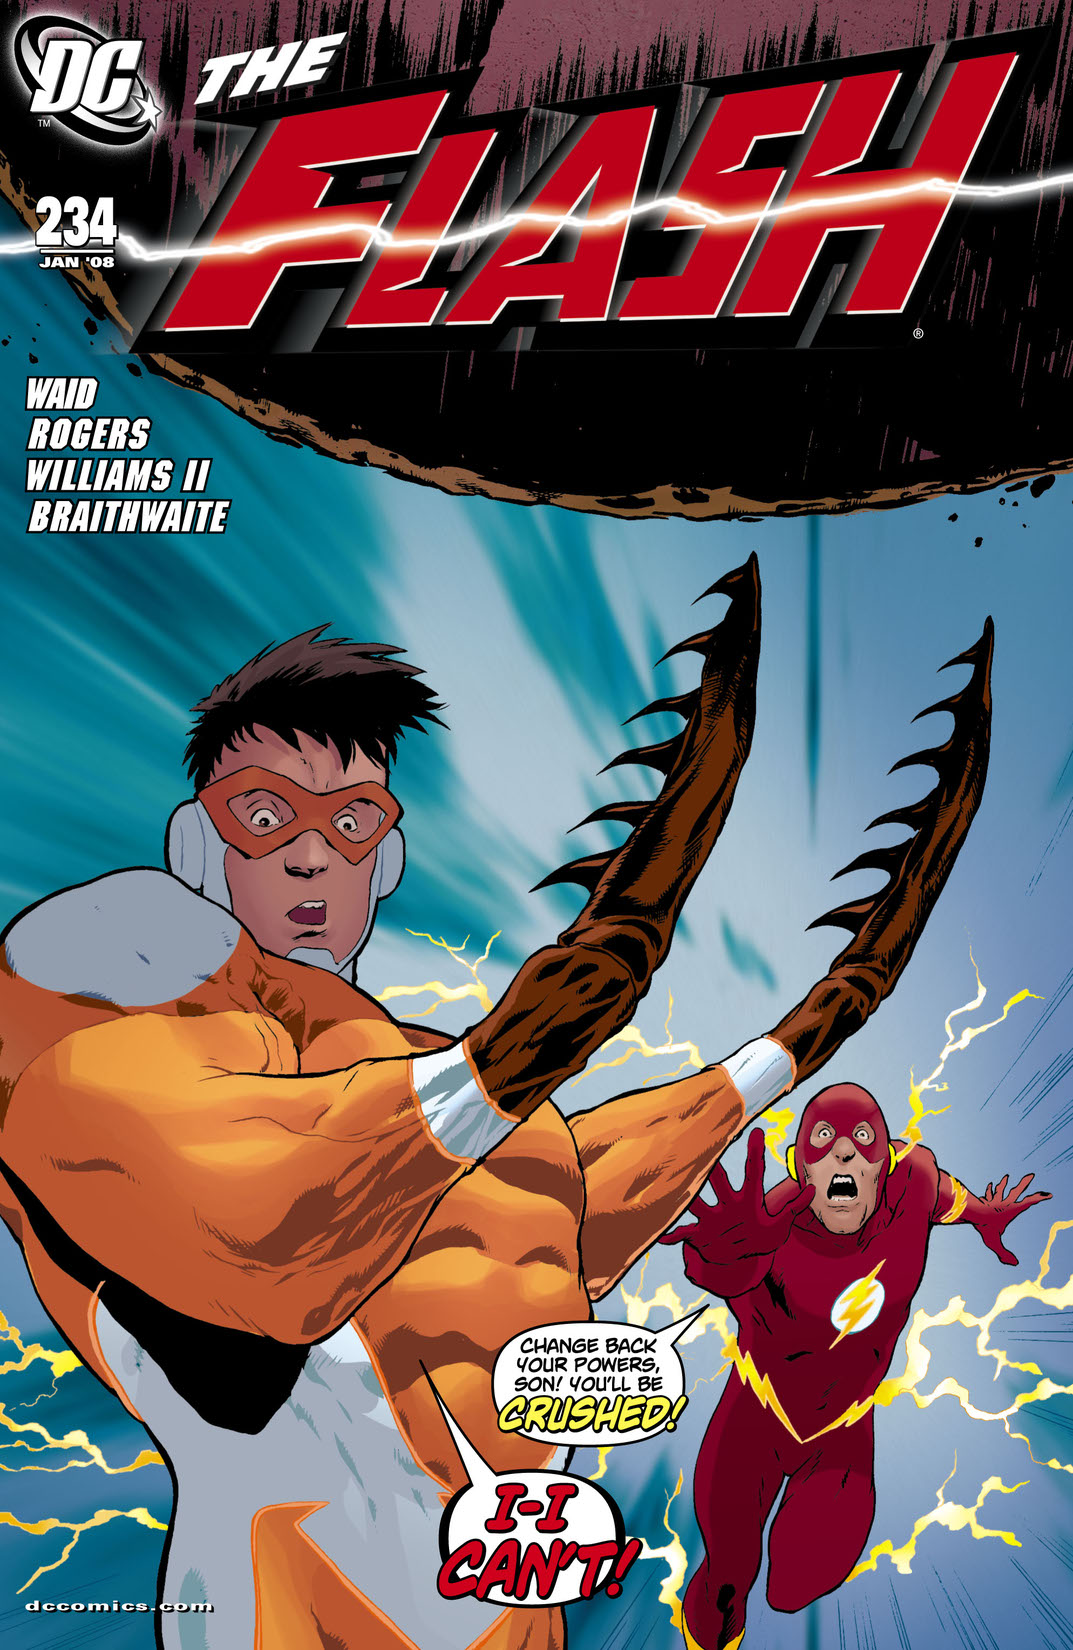 The Flash (1987-) #234 preview images